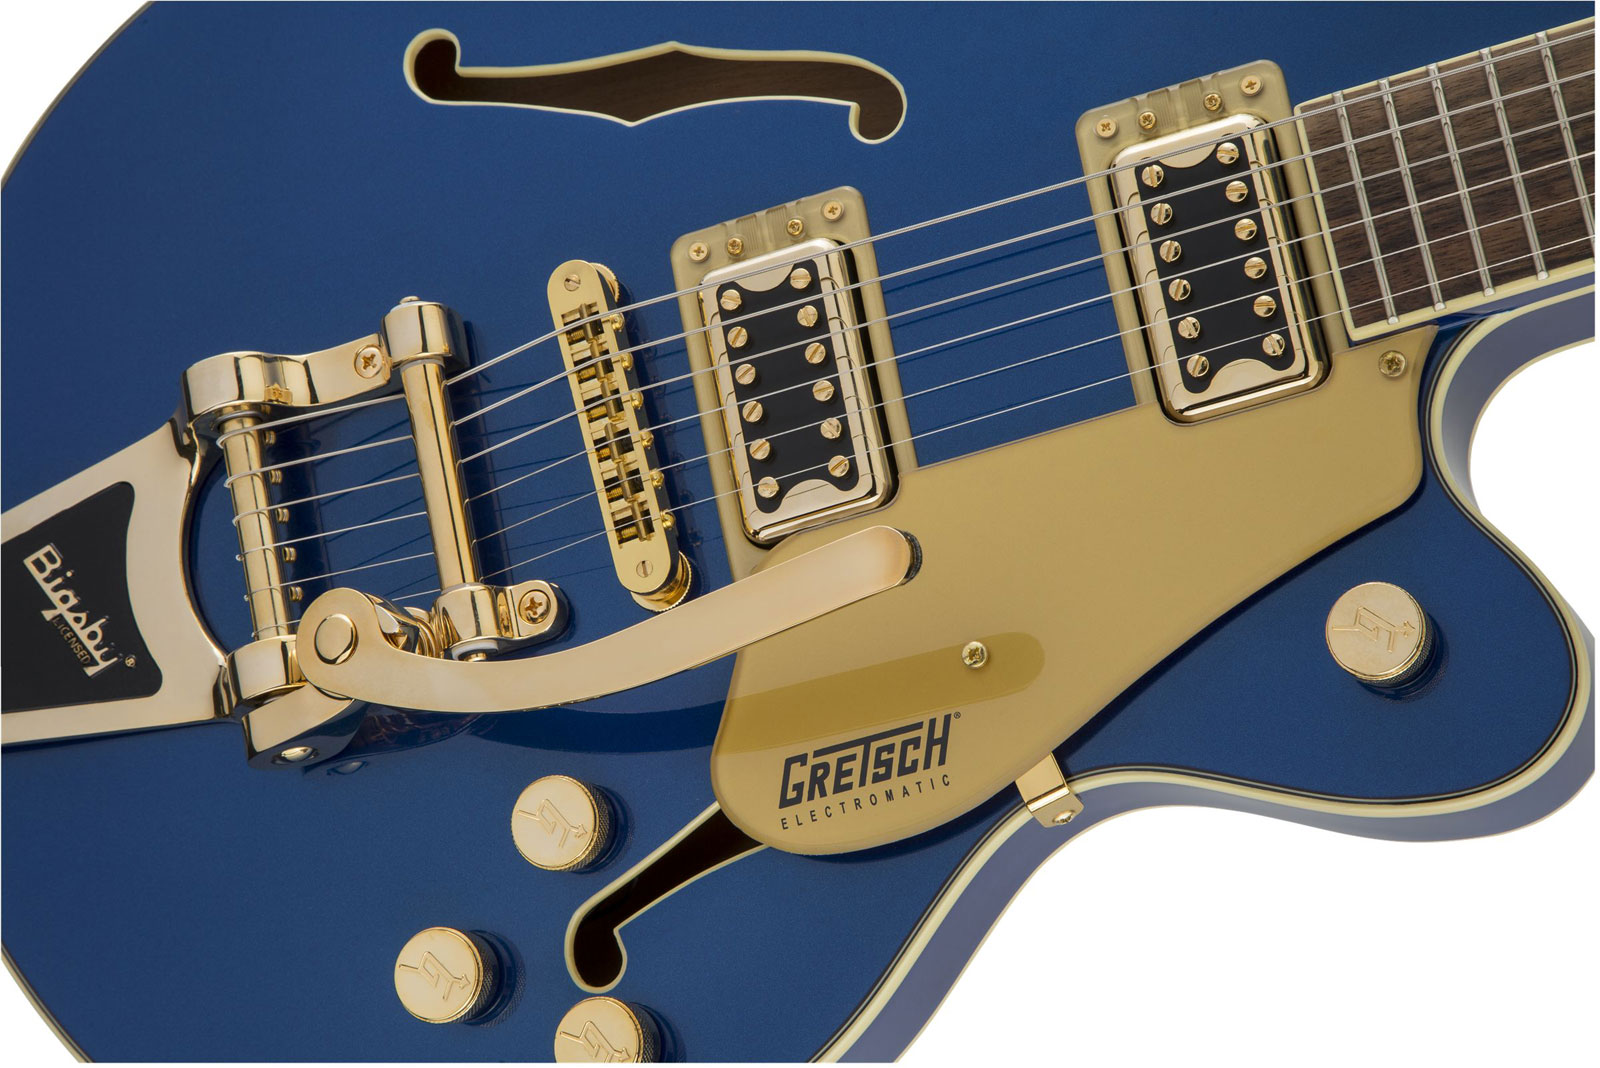 G5655TG ELECTROMATIC CENTER BLOCK JR. SINGLE-CUT WITH BIGSBY AND GOLD HARDWARE LRL, AZURE METALLIC